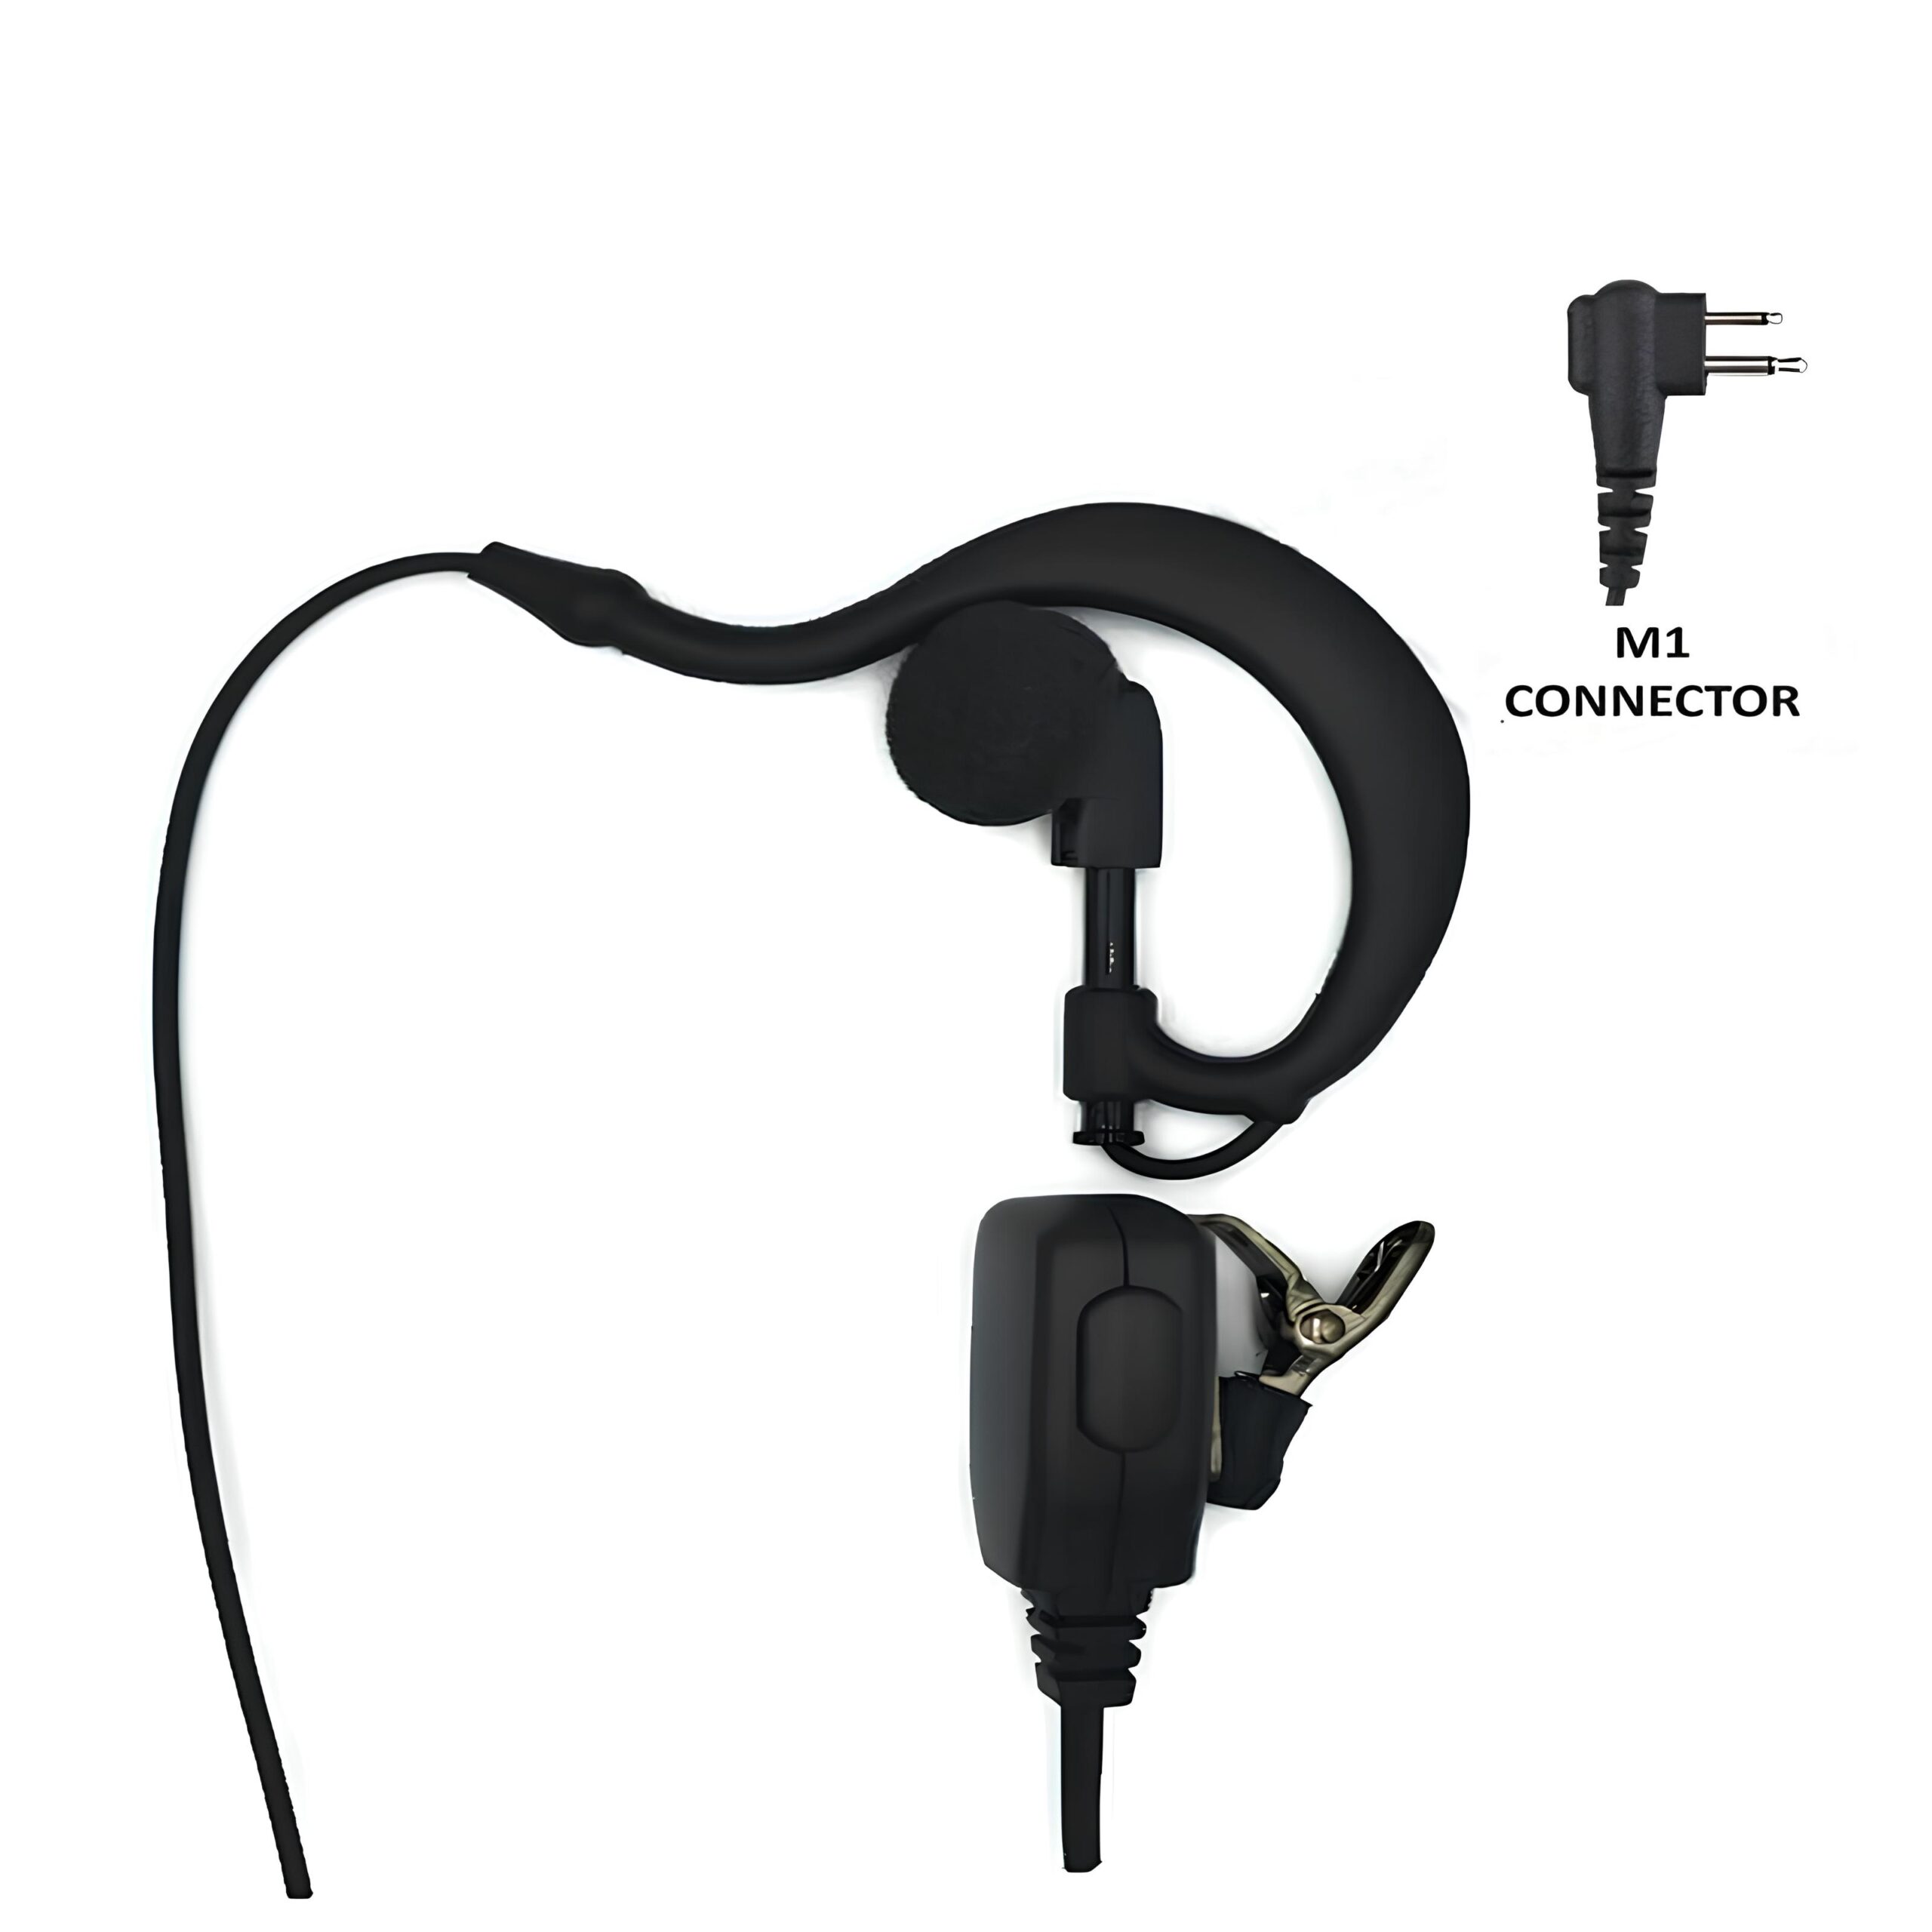 MAX-41 G-Shaped Earpiece with Inline Mic & VOX